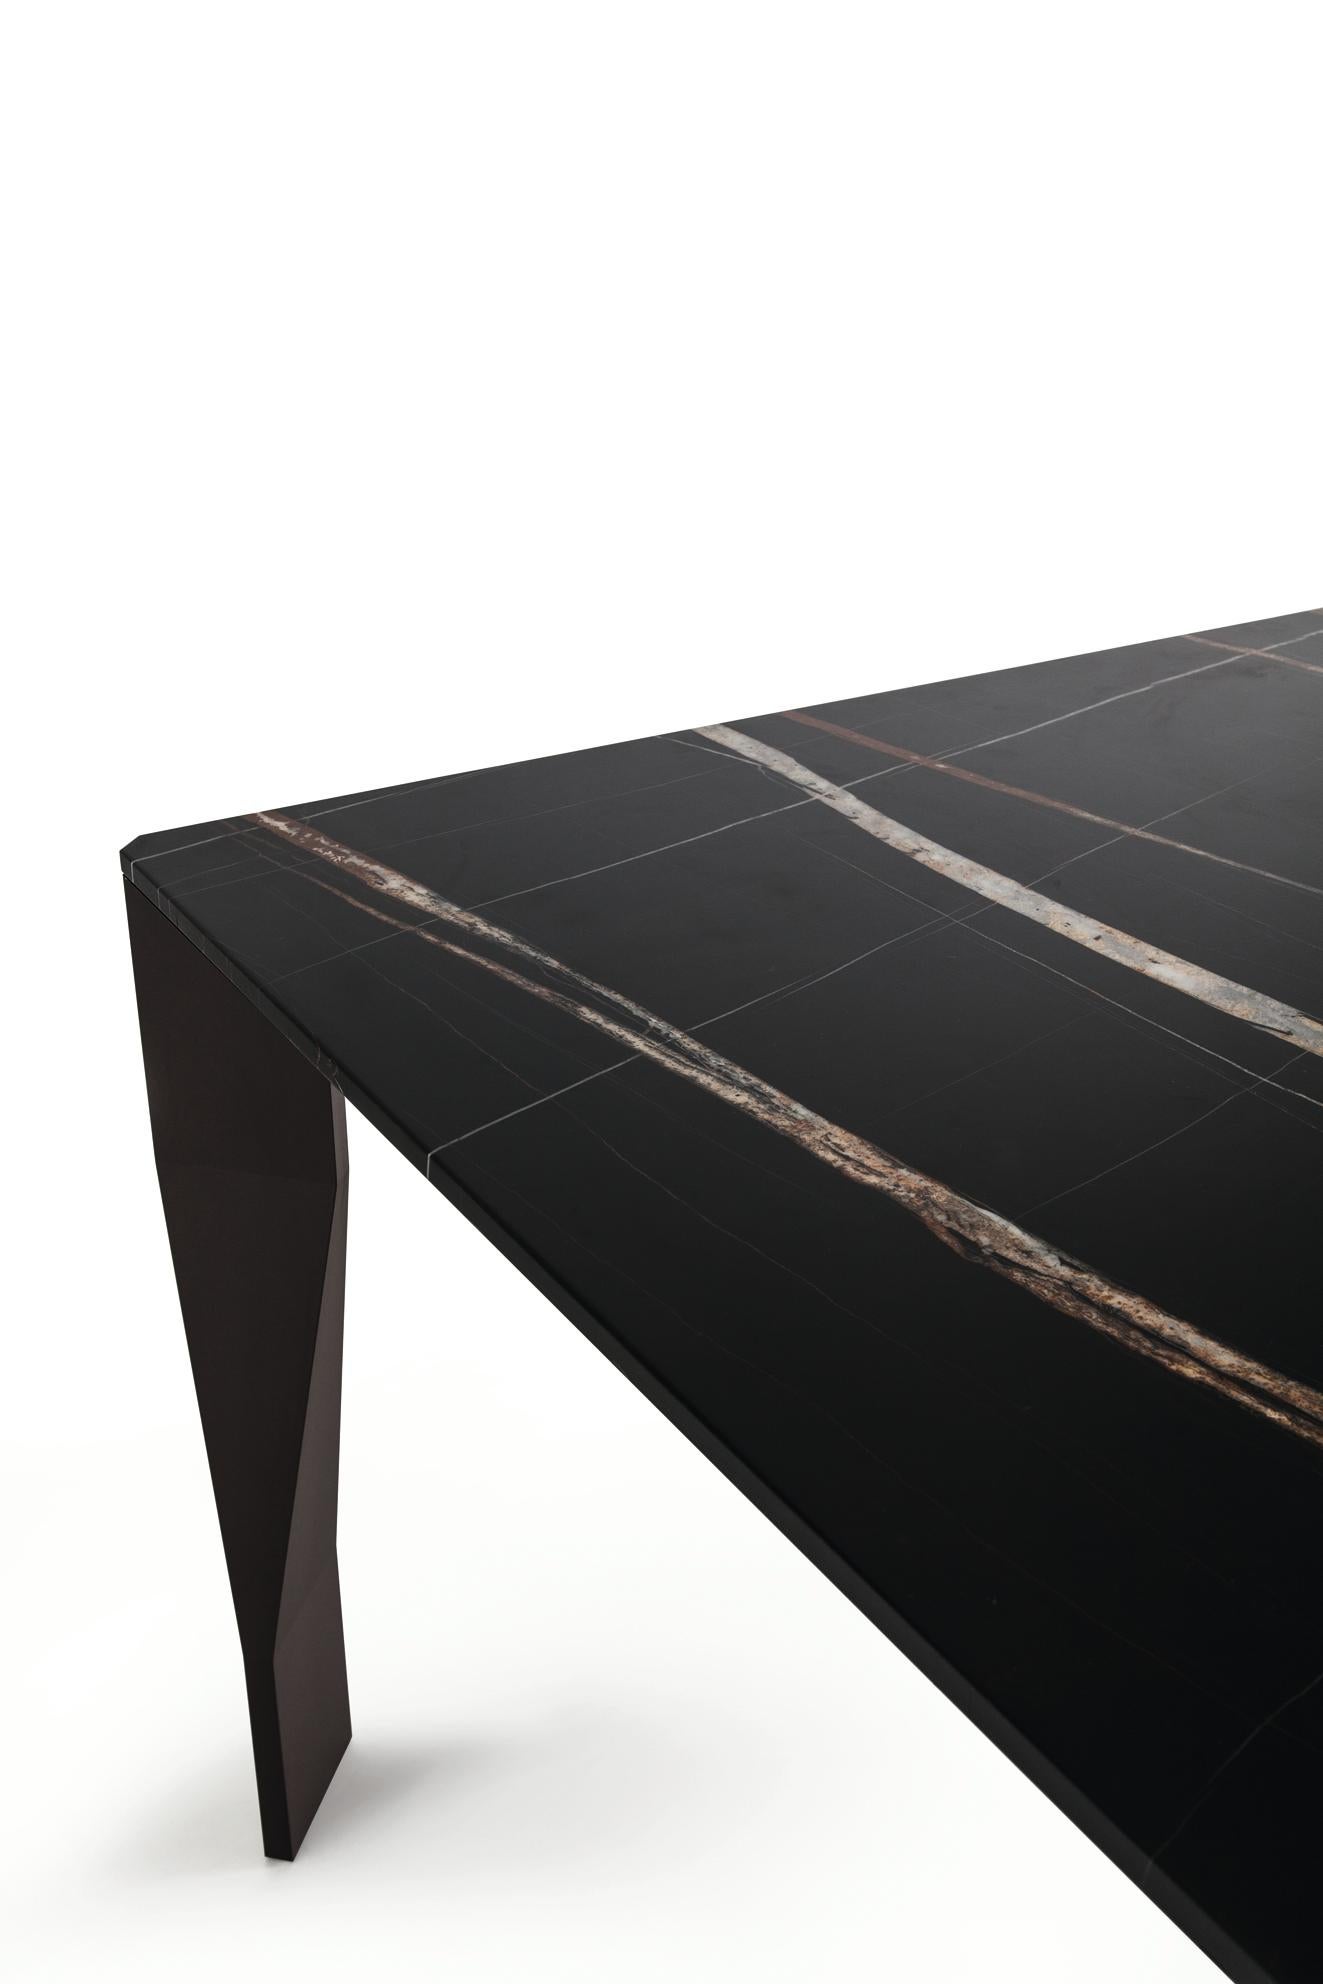 Elegant table with structural element, that give lightness and sobriety to the volumes; the marble used for the countertops elegantly redesigns the proportions. 
Diamond table will be the perfect missing piece for your dining room.
Designed by